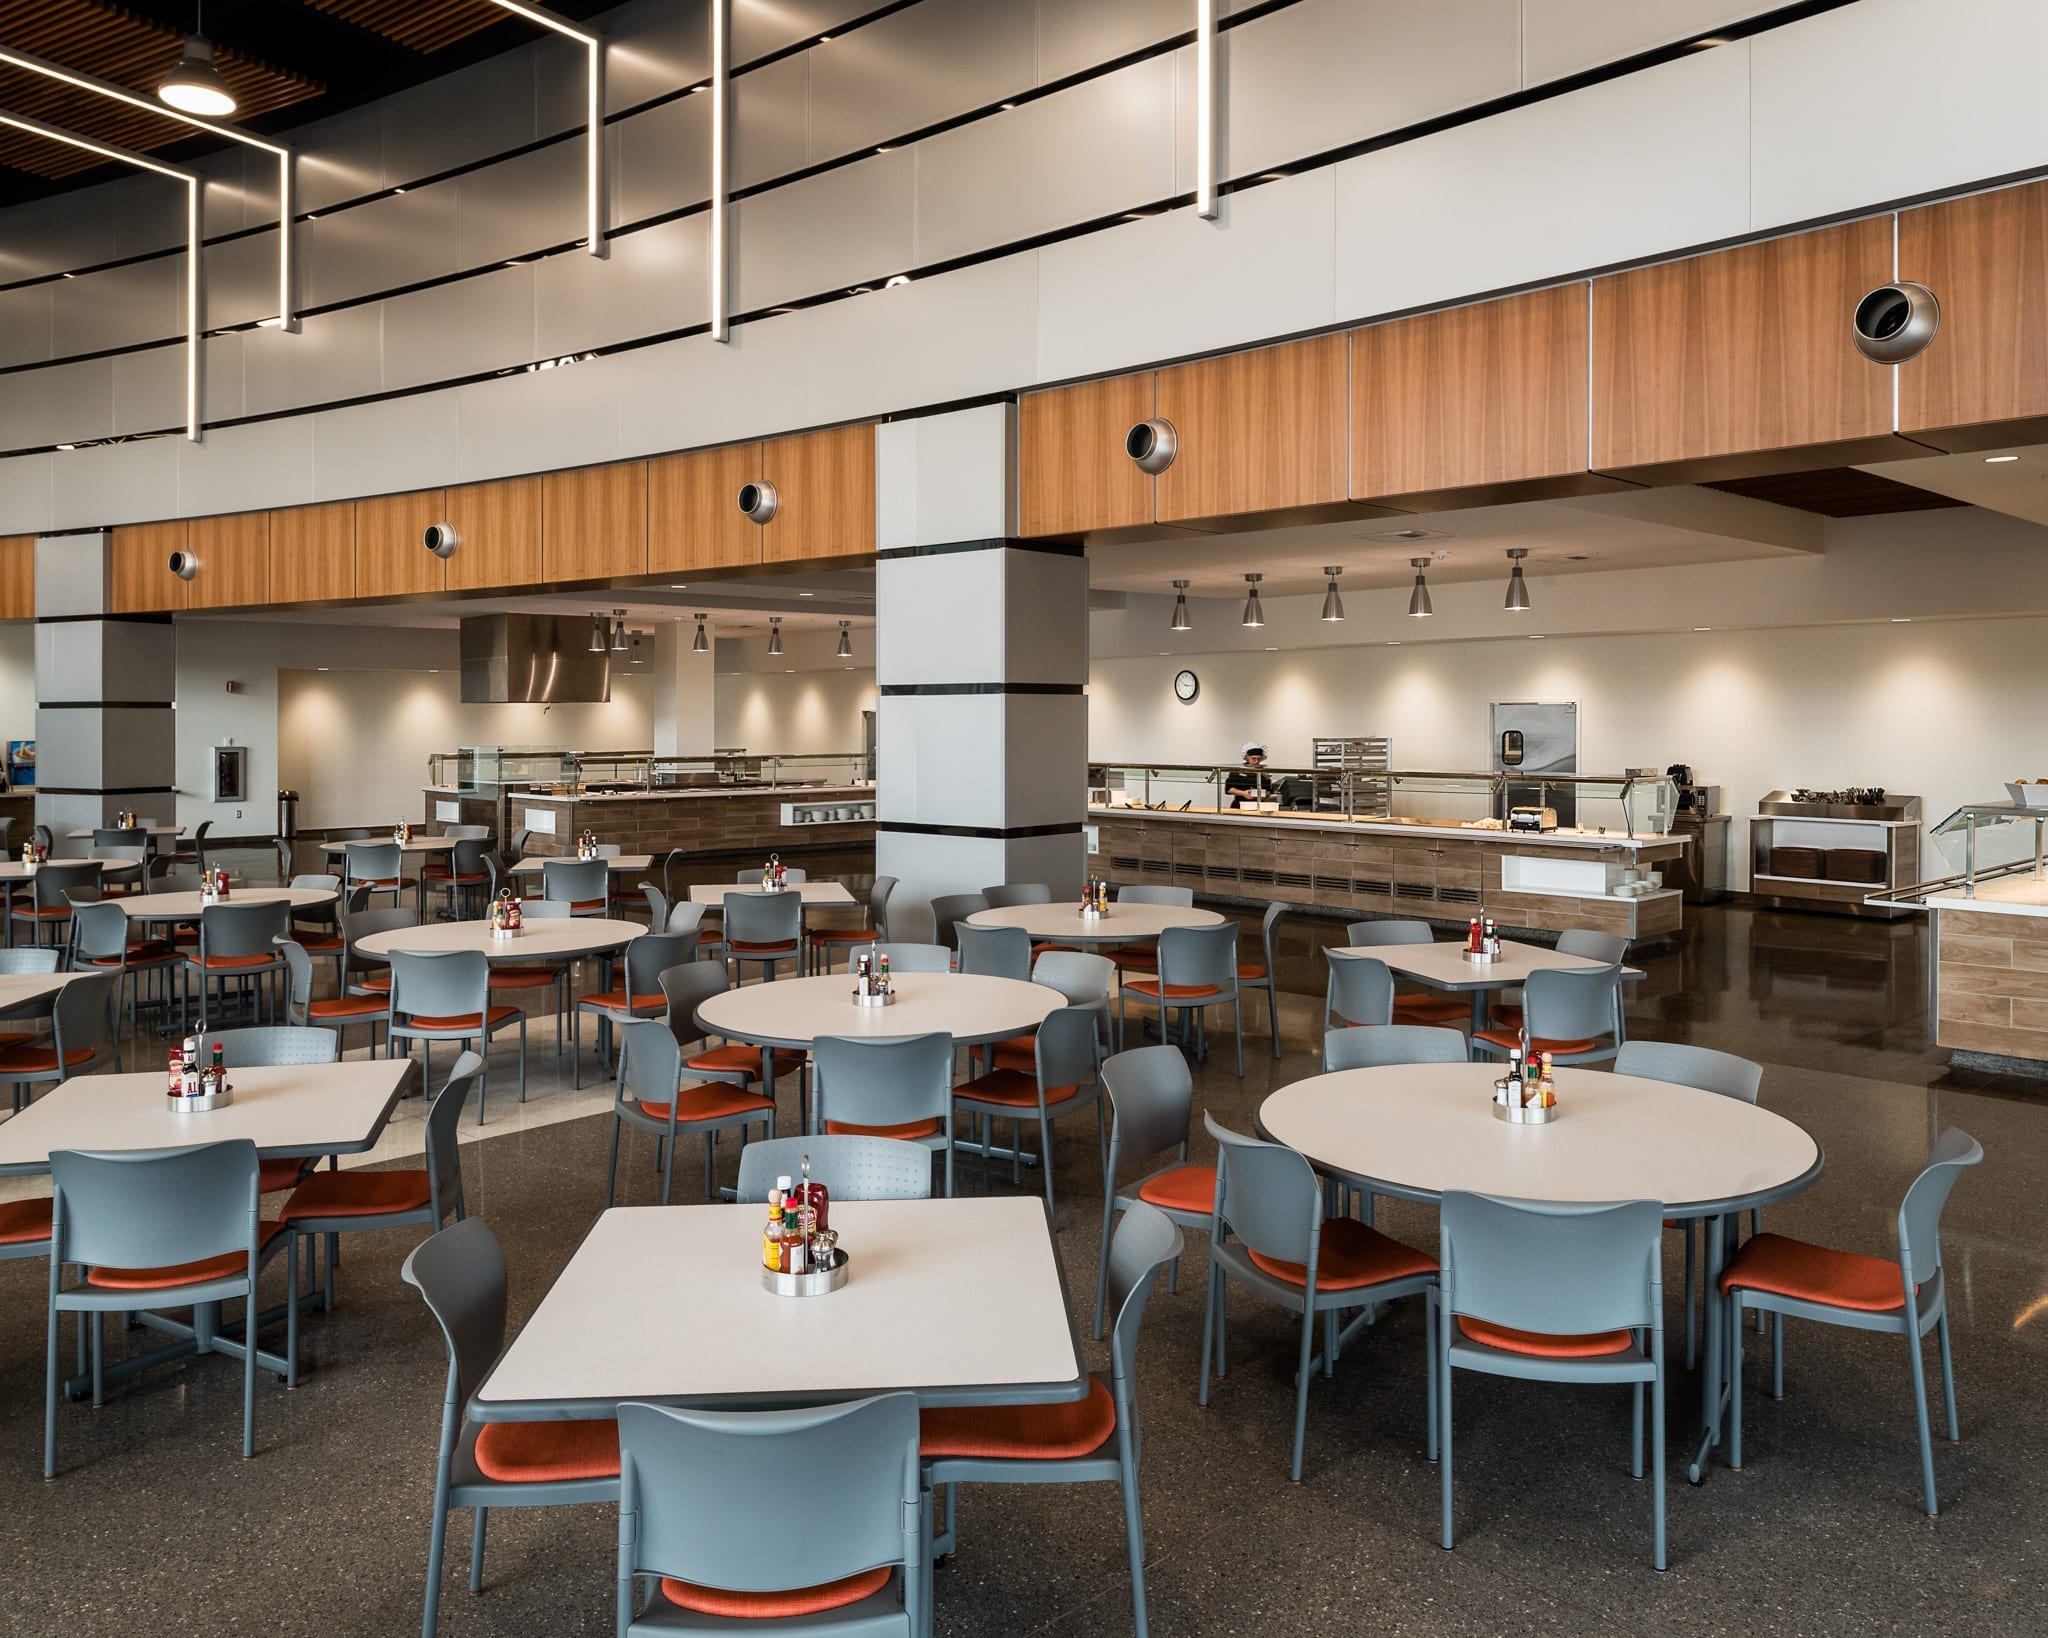 Tables and chairs at dining facility.